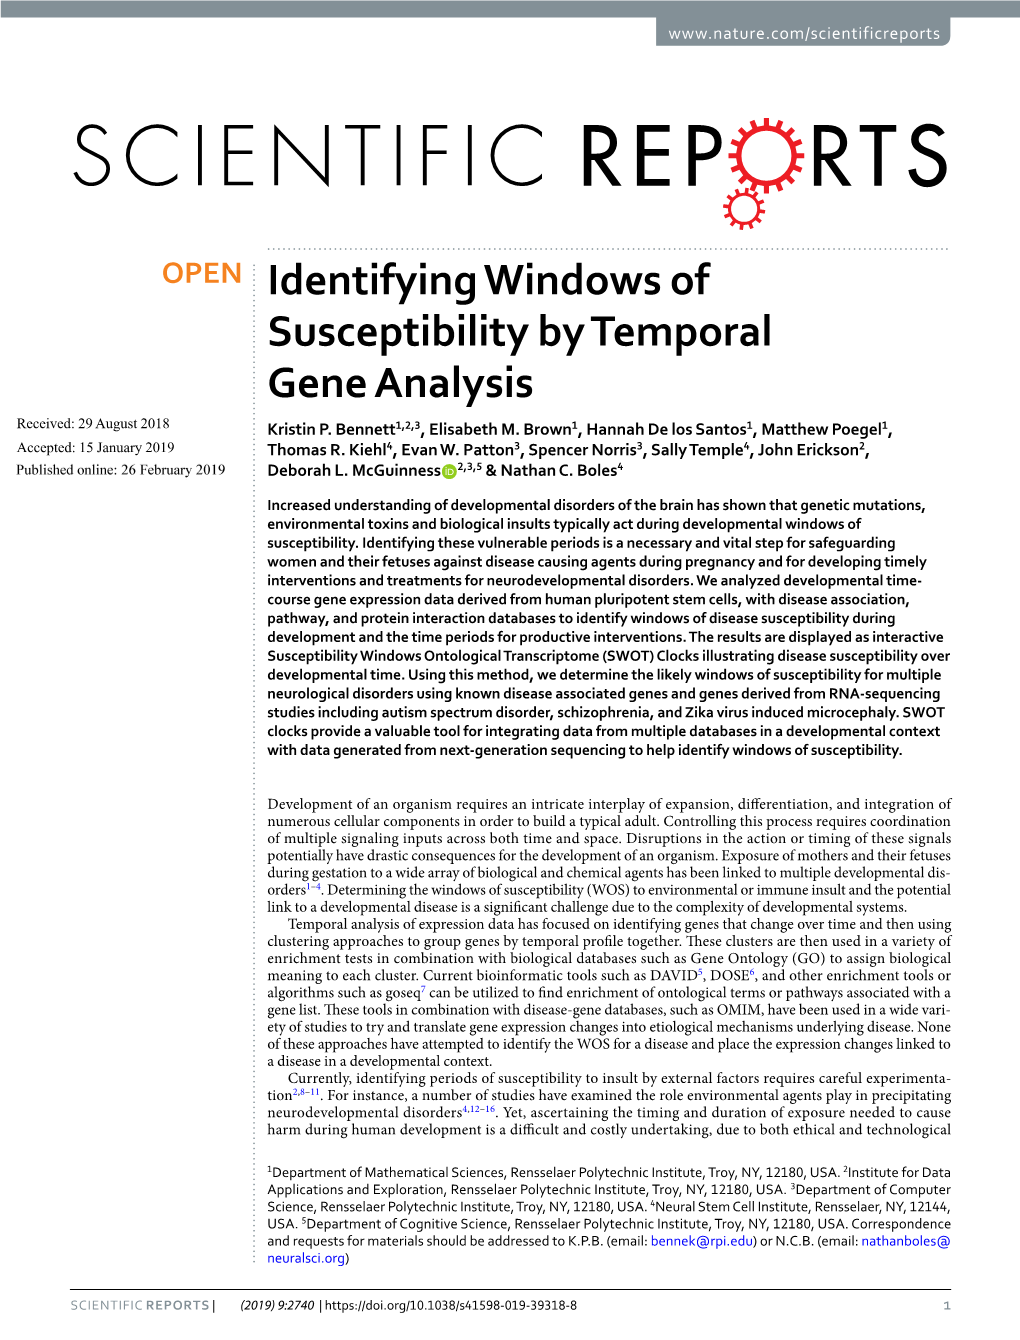 Identifying Windows of Susceptibility by Temporal Gene Analysis Received: 29 August 2018 Kristin P